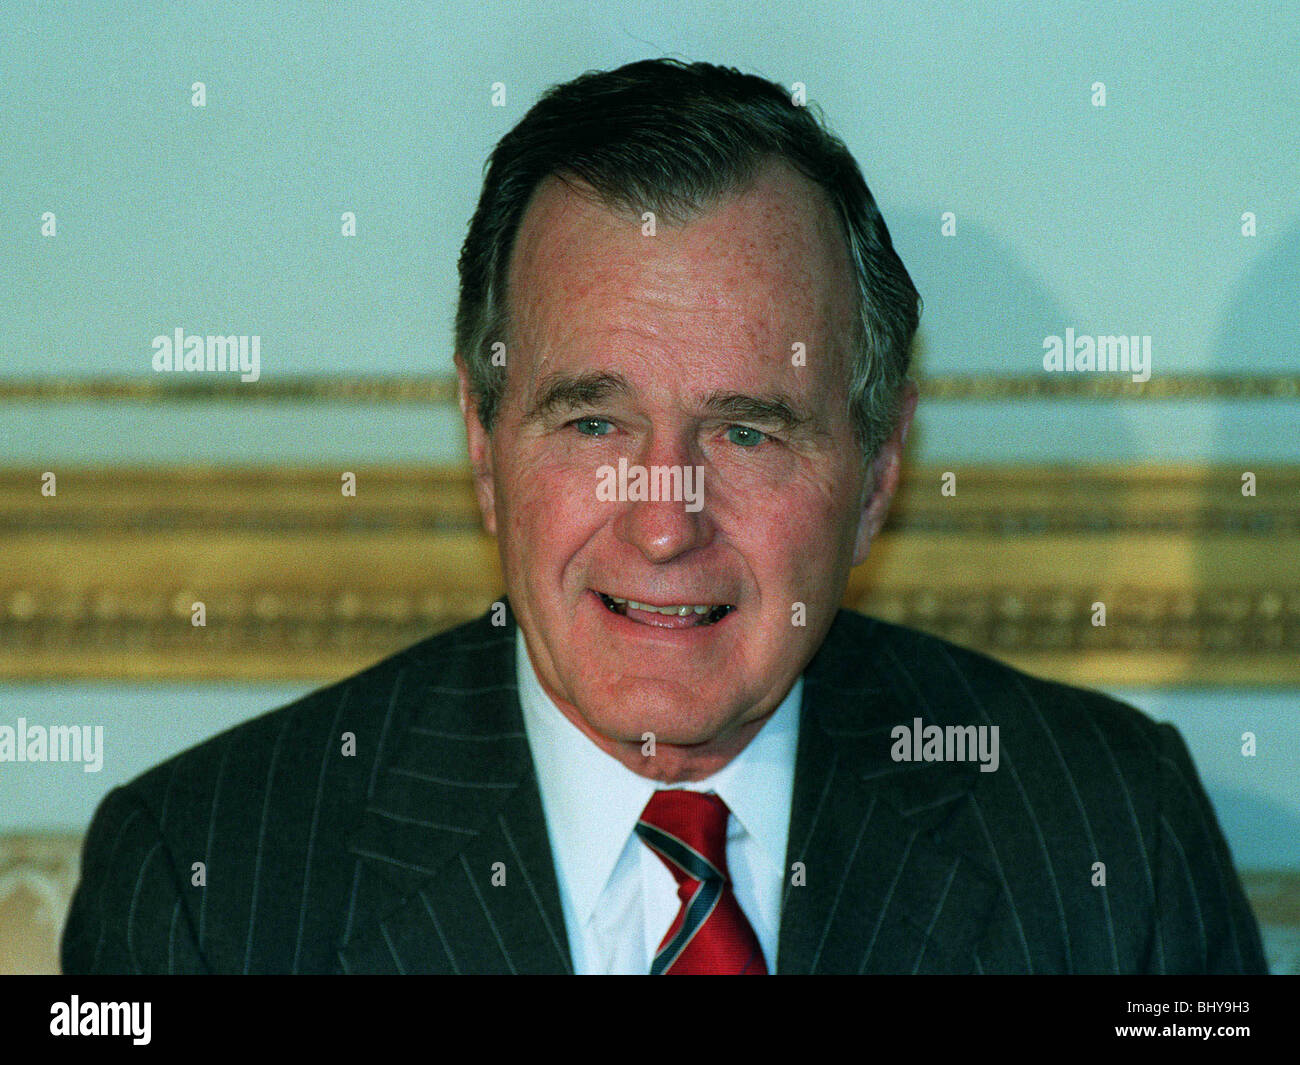 GEORGE BUSH PRESIDENT OF THE U.S.A. 28 May 1991 Stock Photo